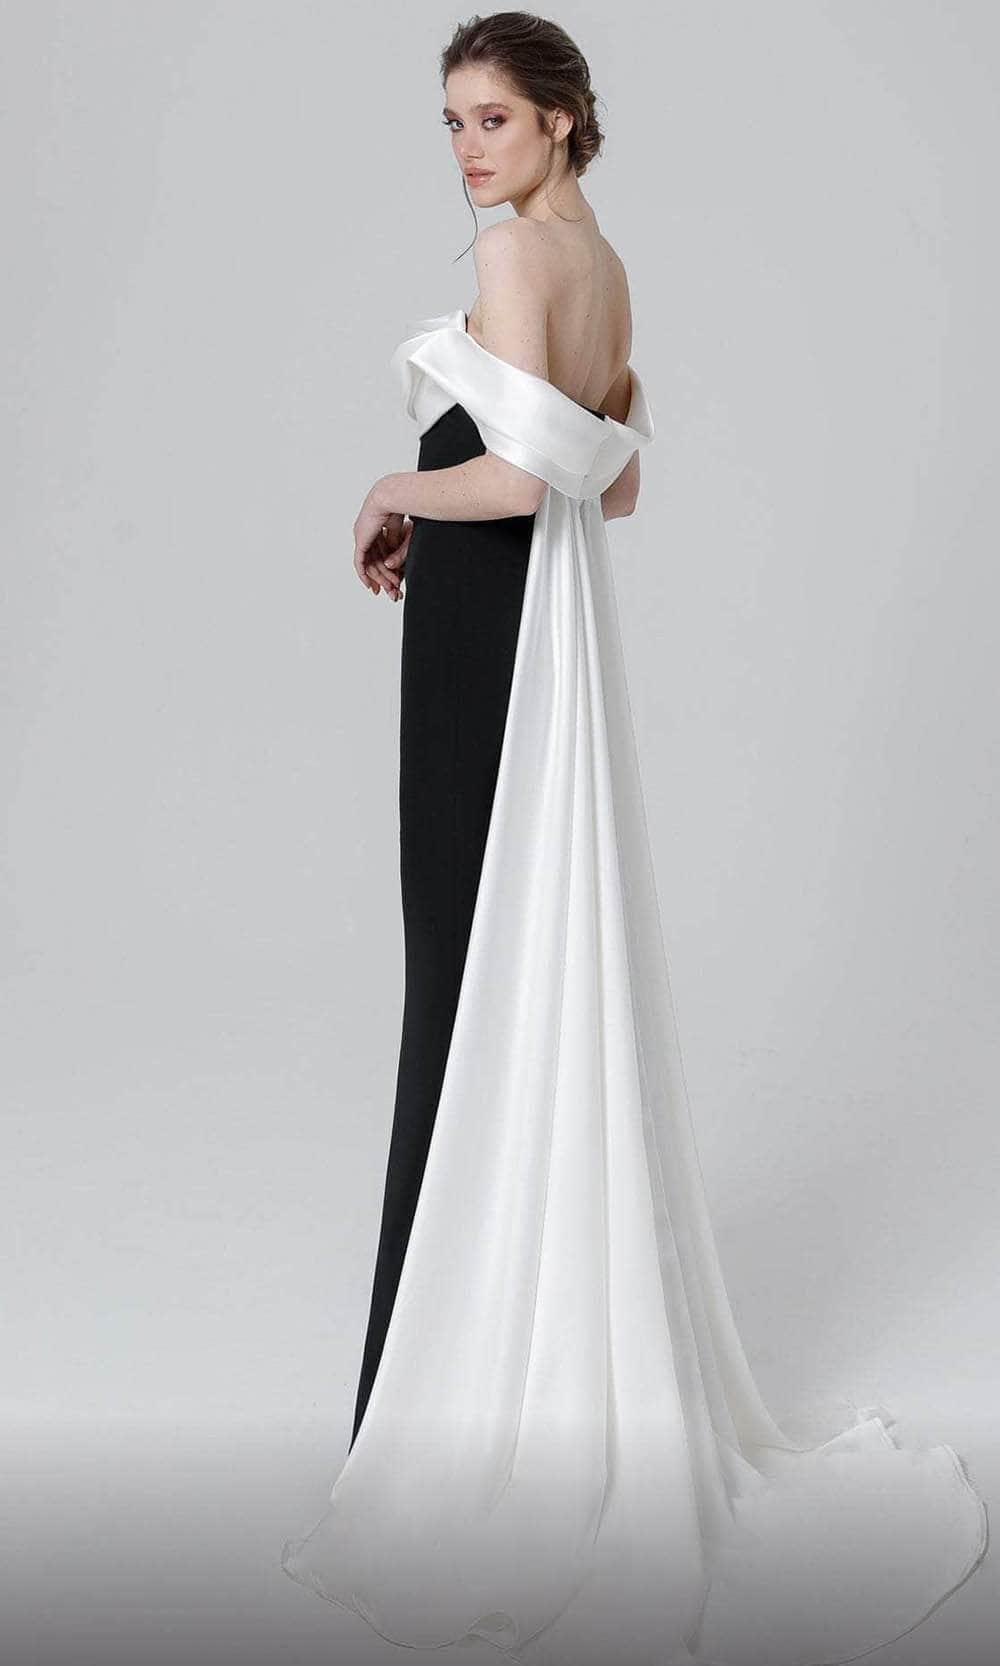 MNM COUTURE N0456 - Draped Off Shoulder Evening Dress In Black and White